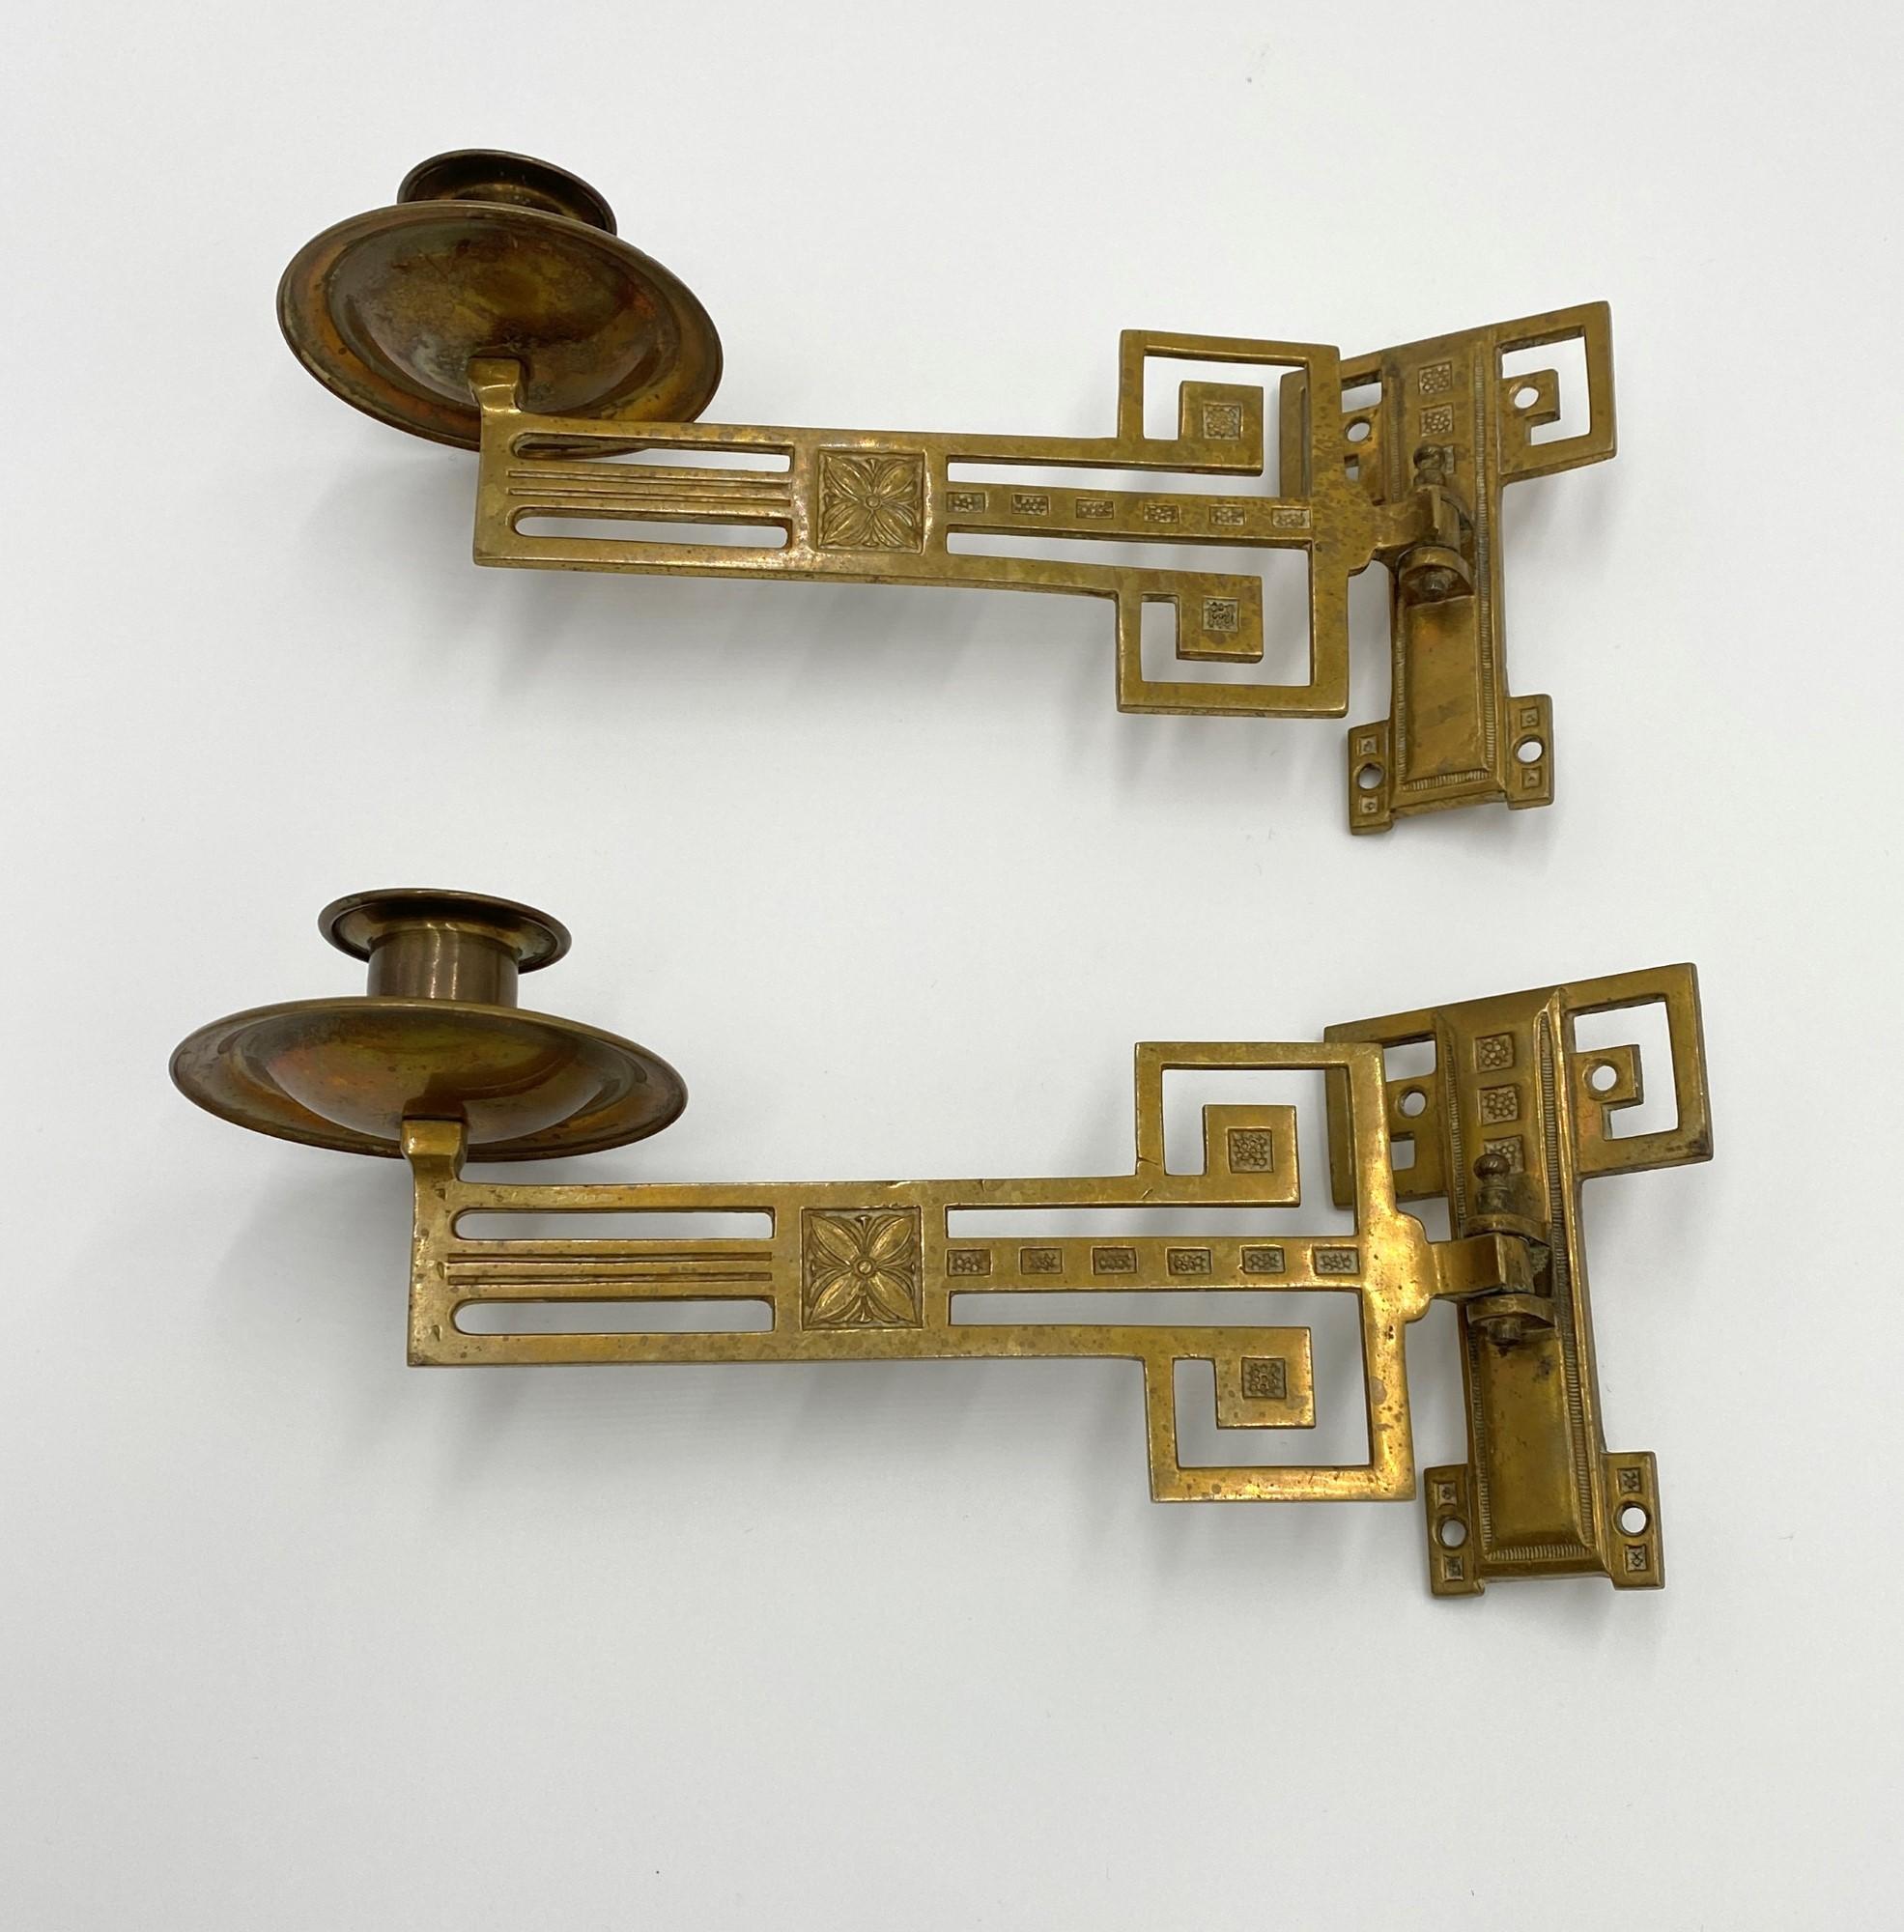 Adjustable late 19th century Victorian style piano sconces. Solid brass with geometric details and a floral motif in the each arm. One arm each. These are not wired. Priced as a pair. This can be seen at our 333 West 52nd St location in the Theater